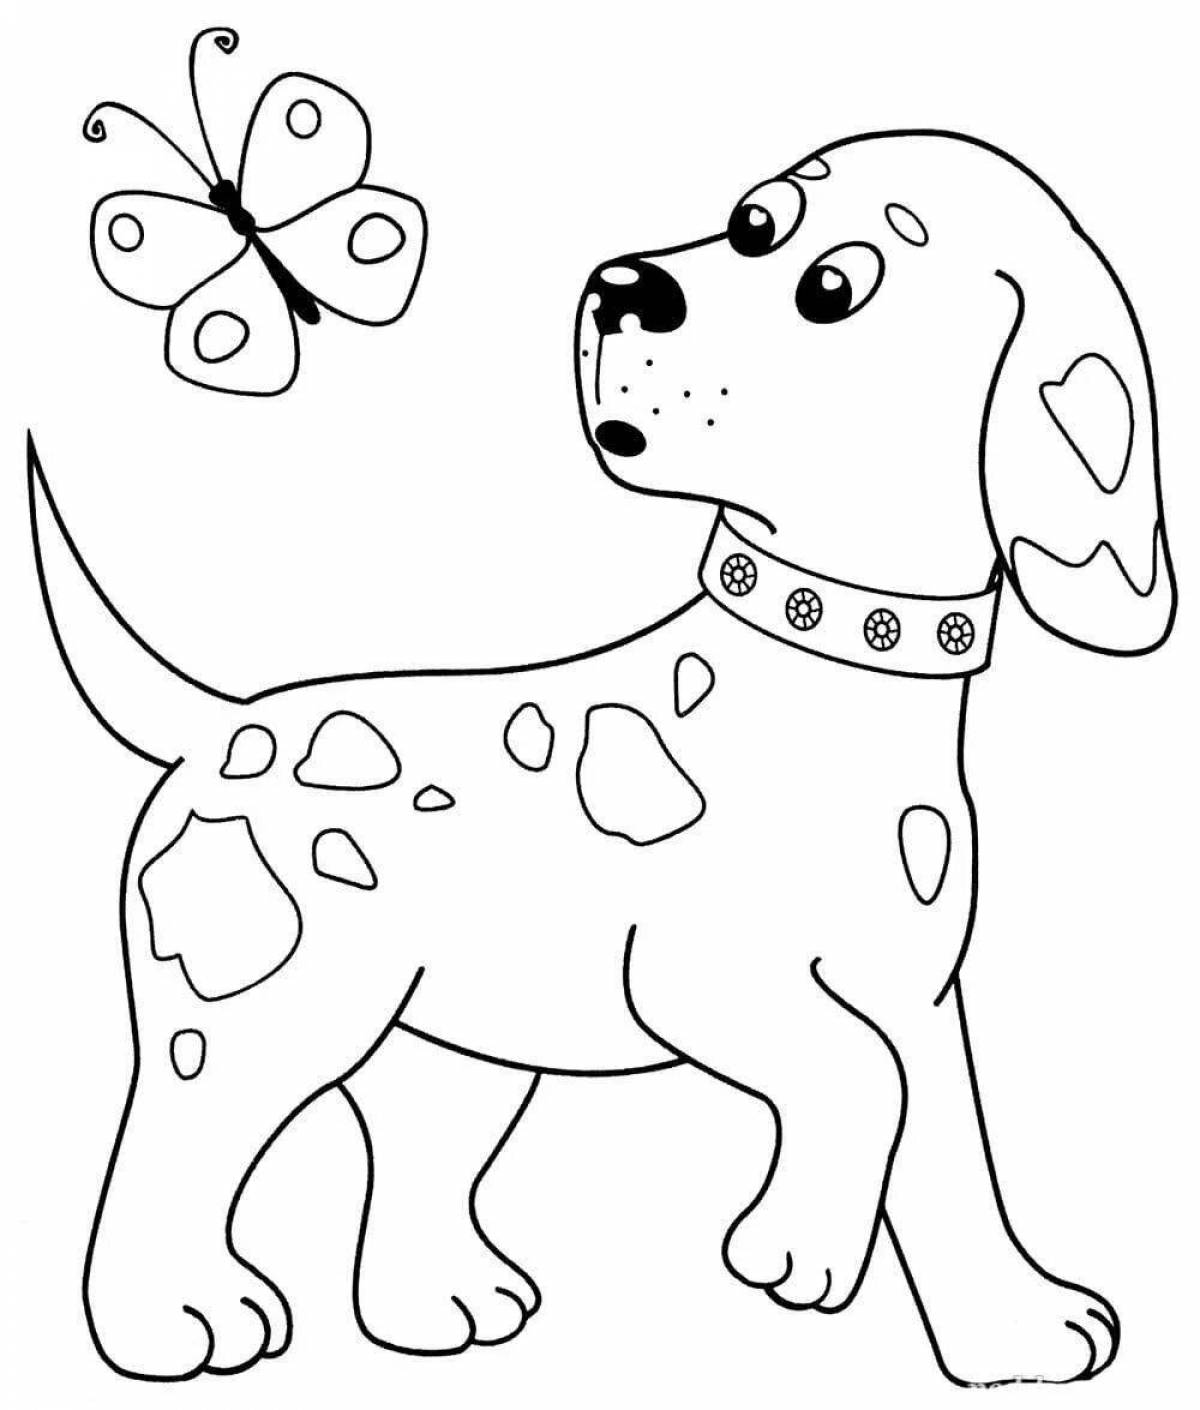 Curious puppy coloring page